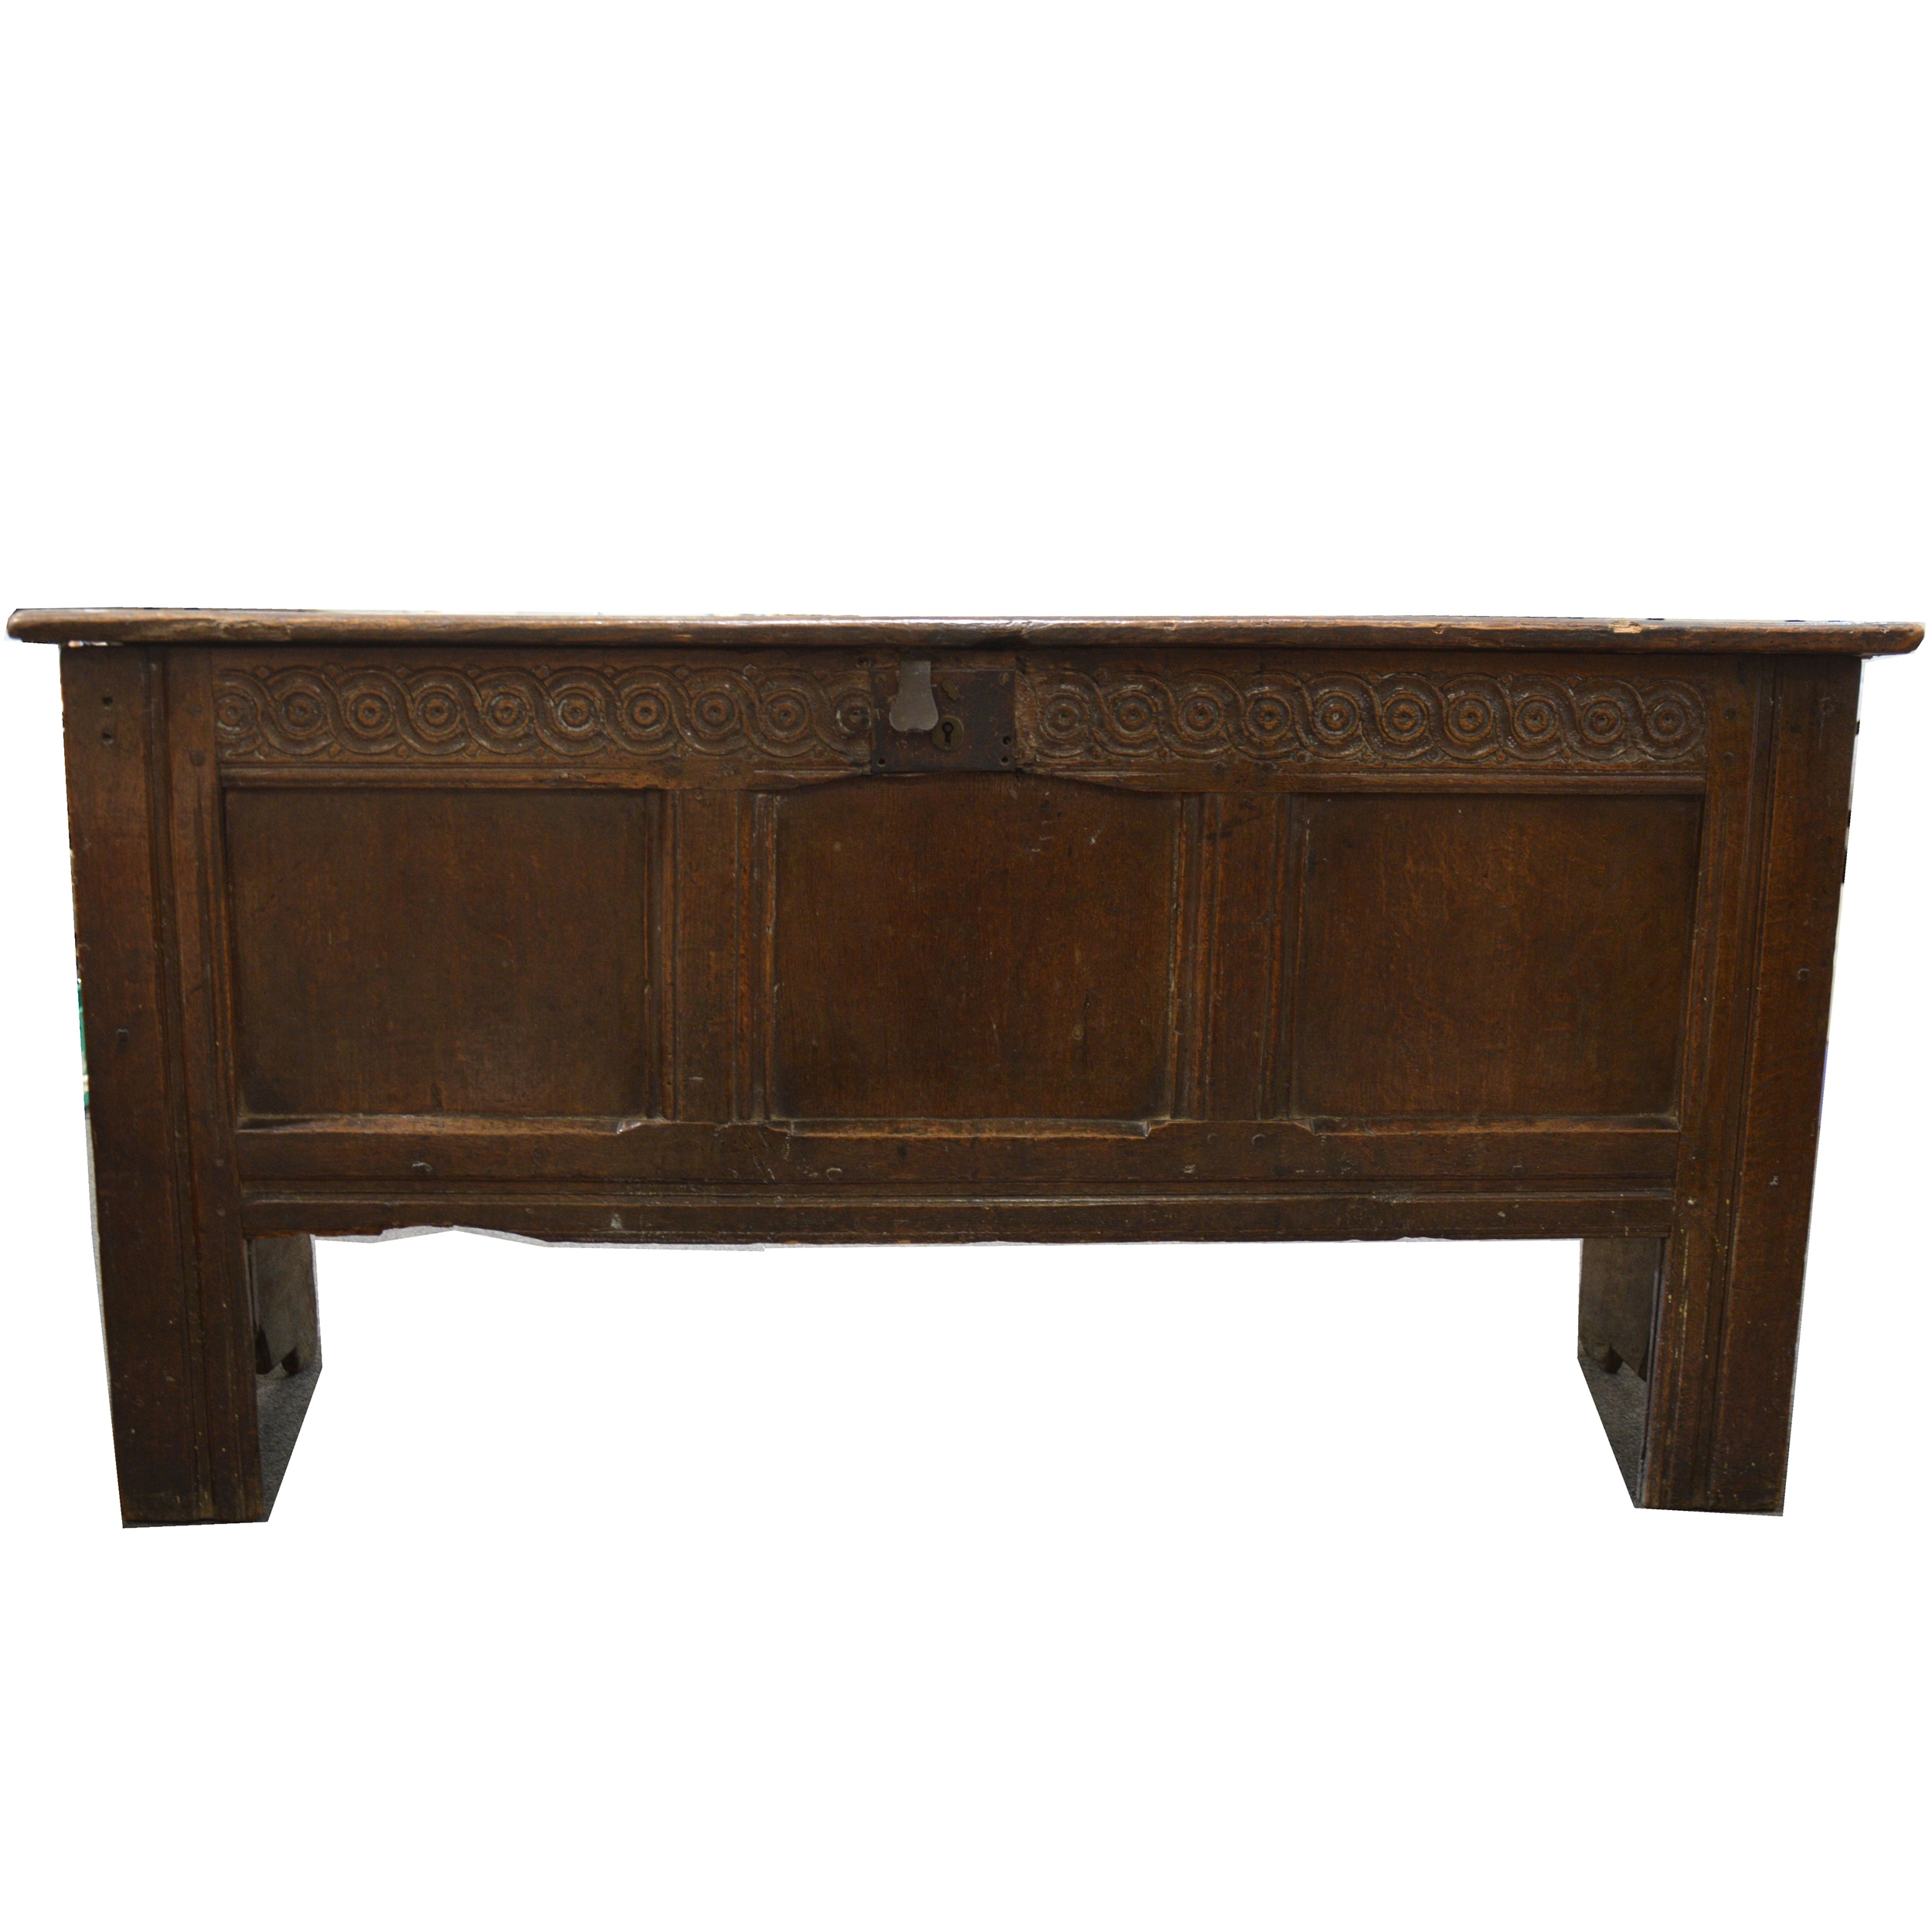 An oak coffer, 18th Century, rectangular hinged boarded top, the front with